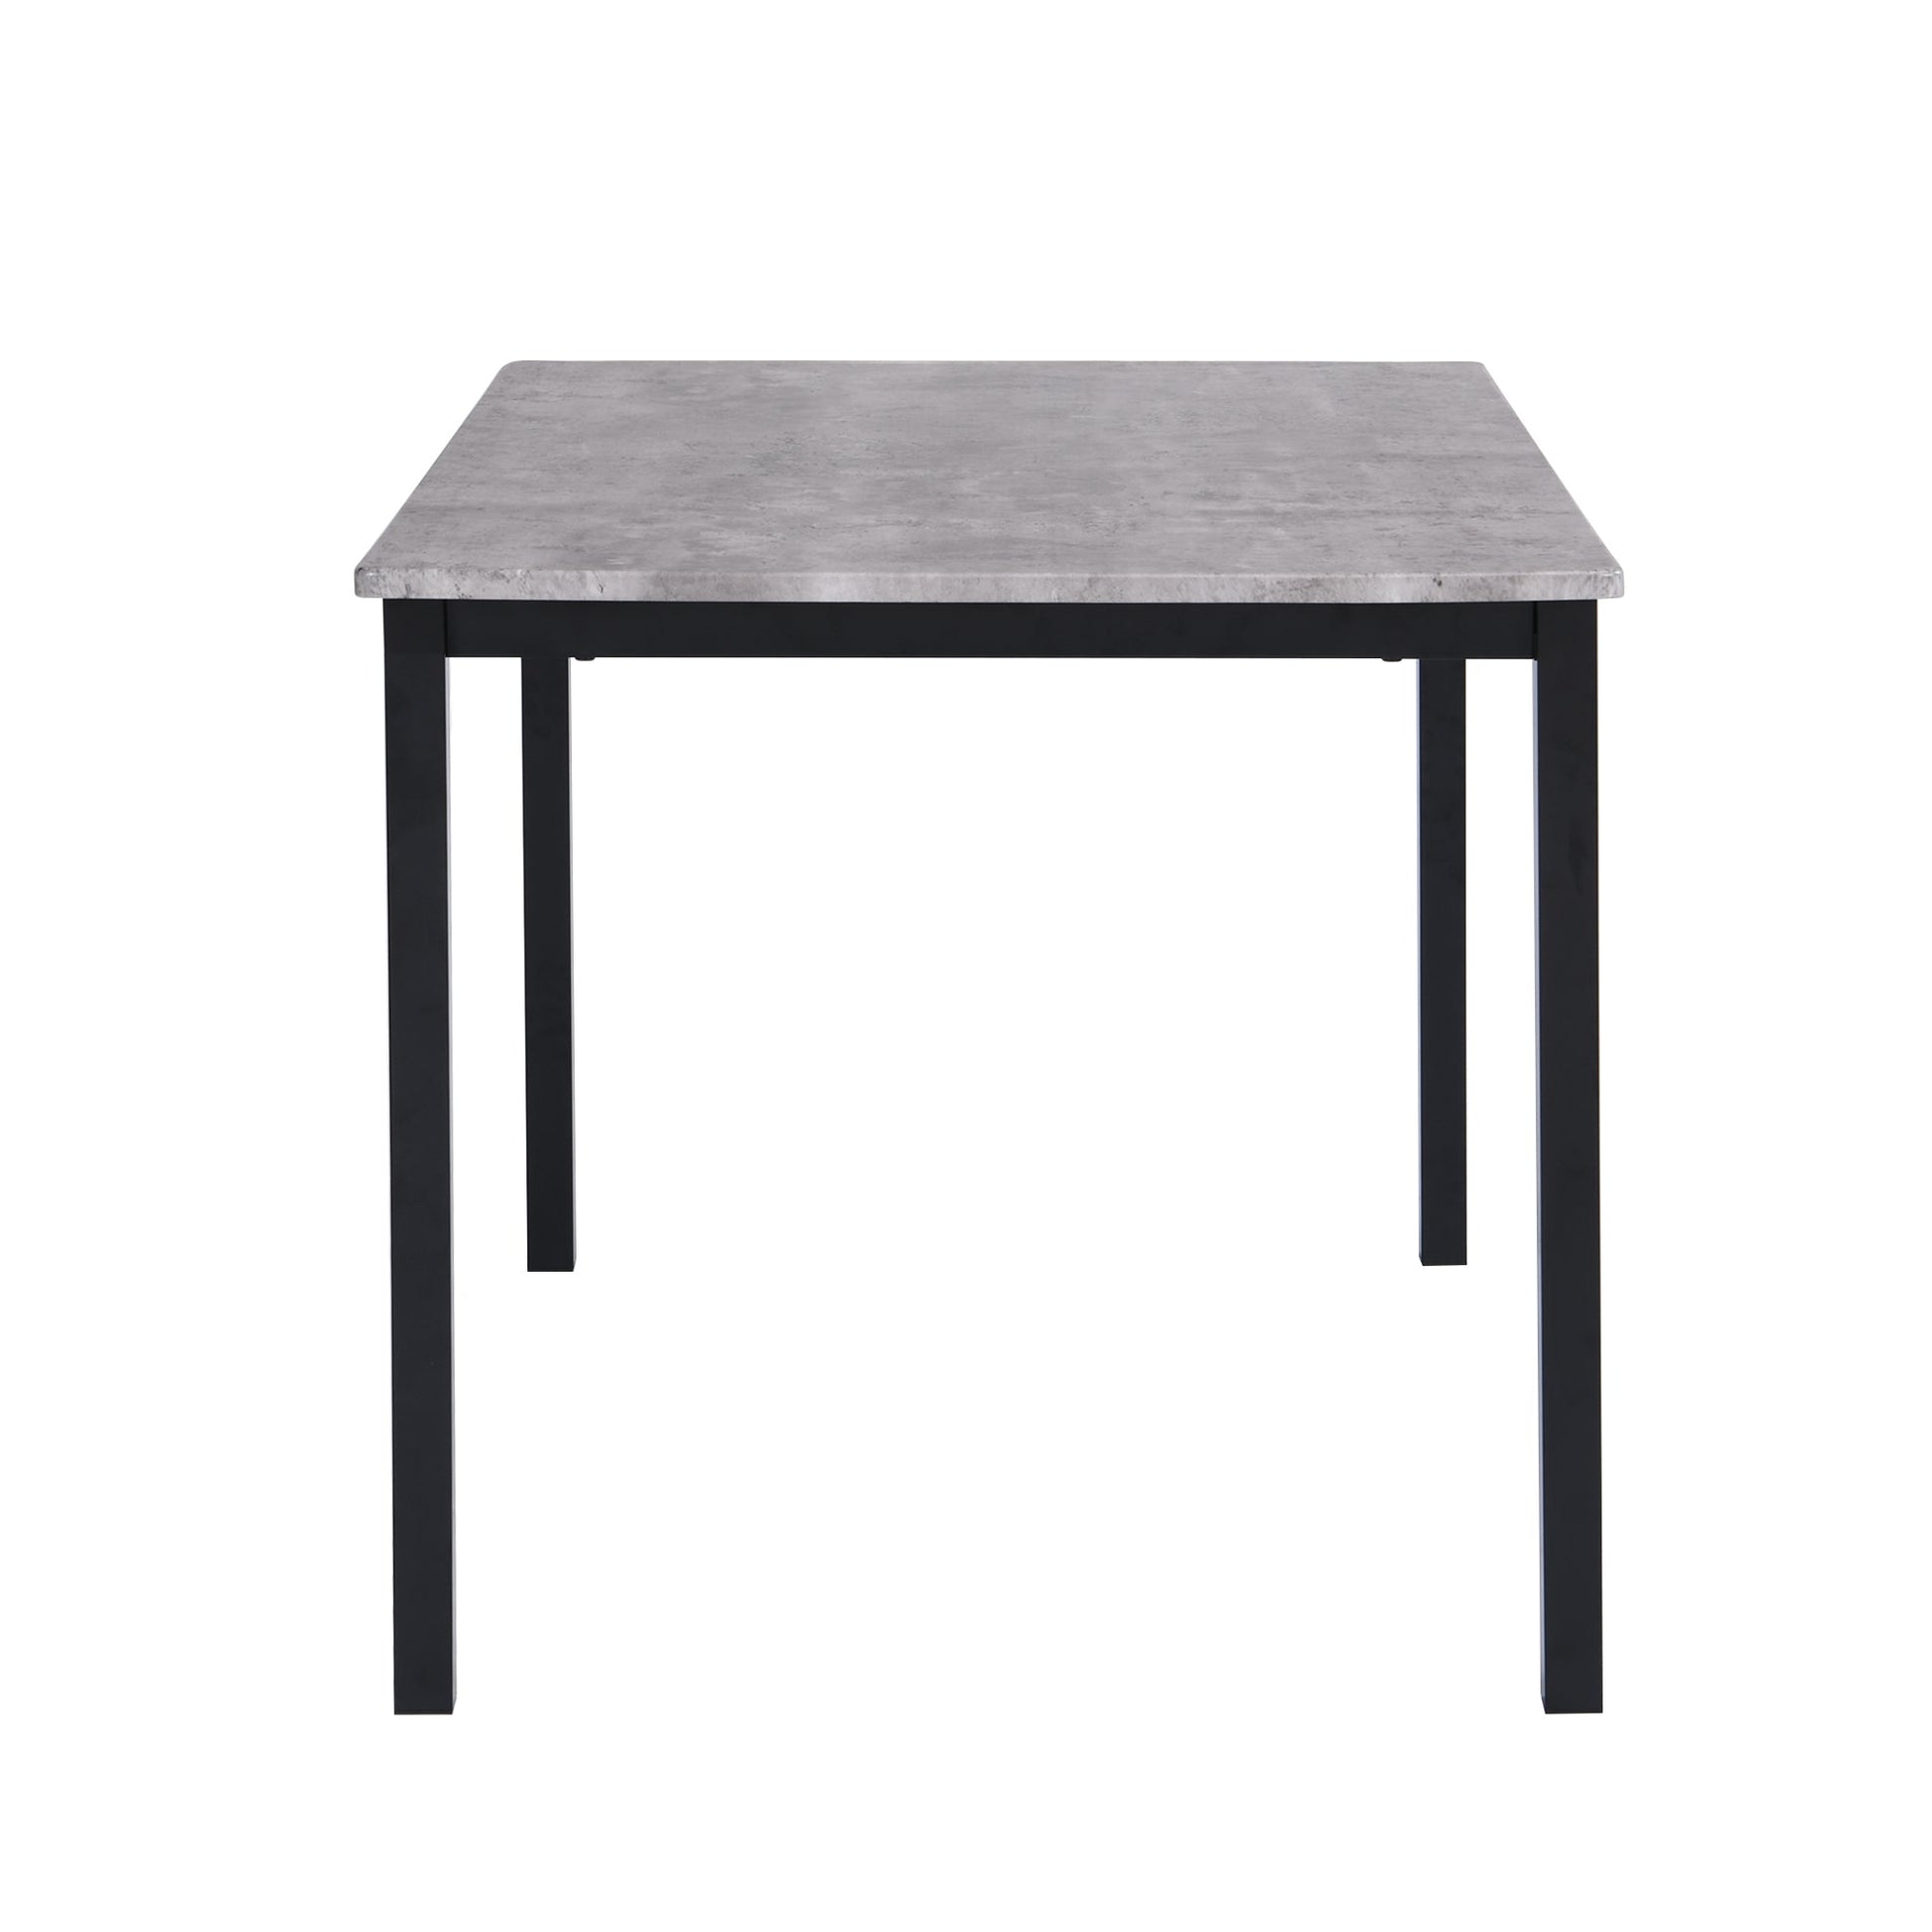 Milo dining table - 4 seater - Concrete effect and black - Laura James